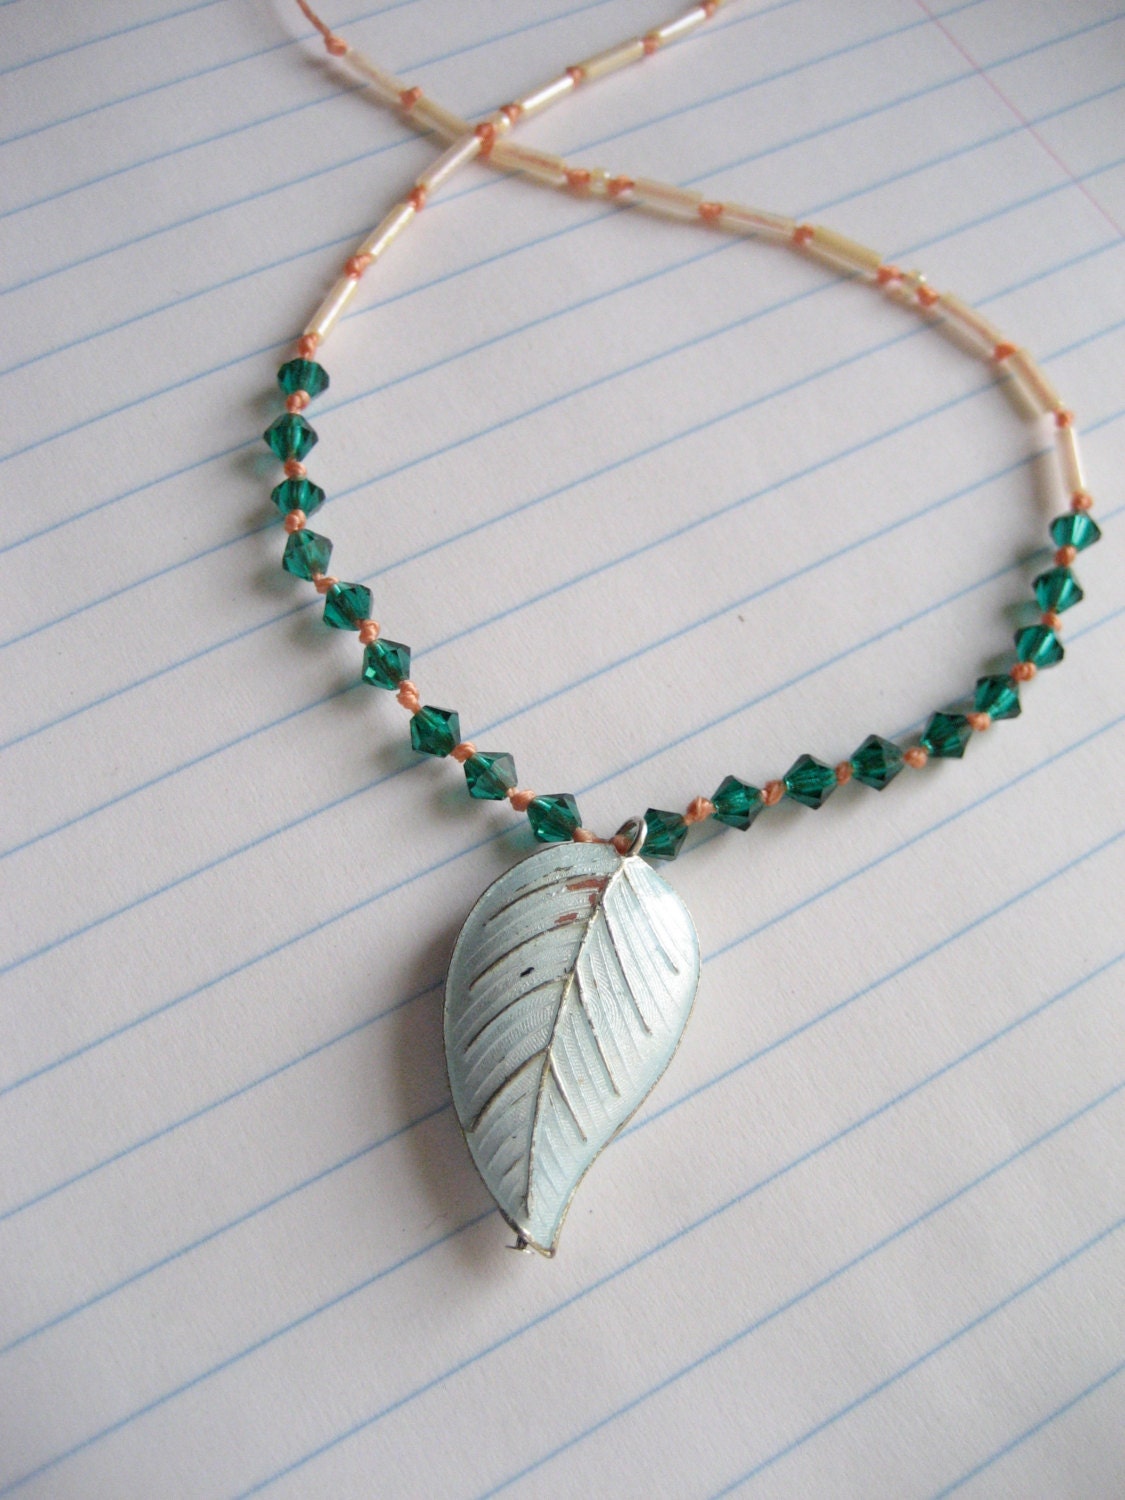 Blue Leaf and Emerald necklace - sarawolfiejewelry